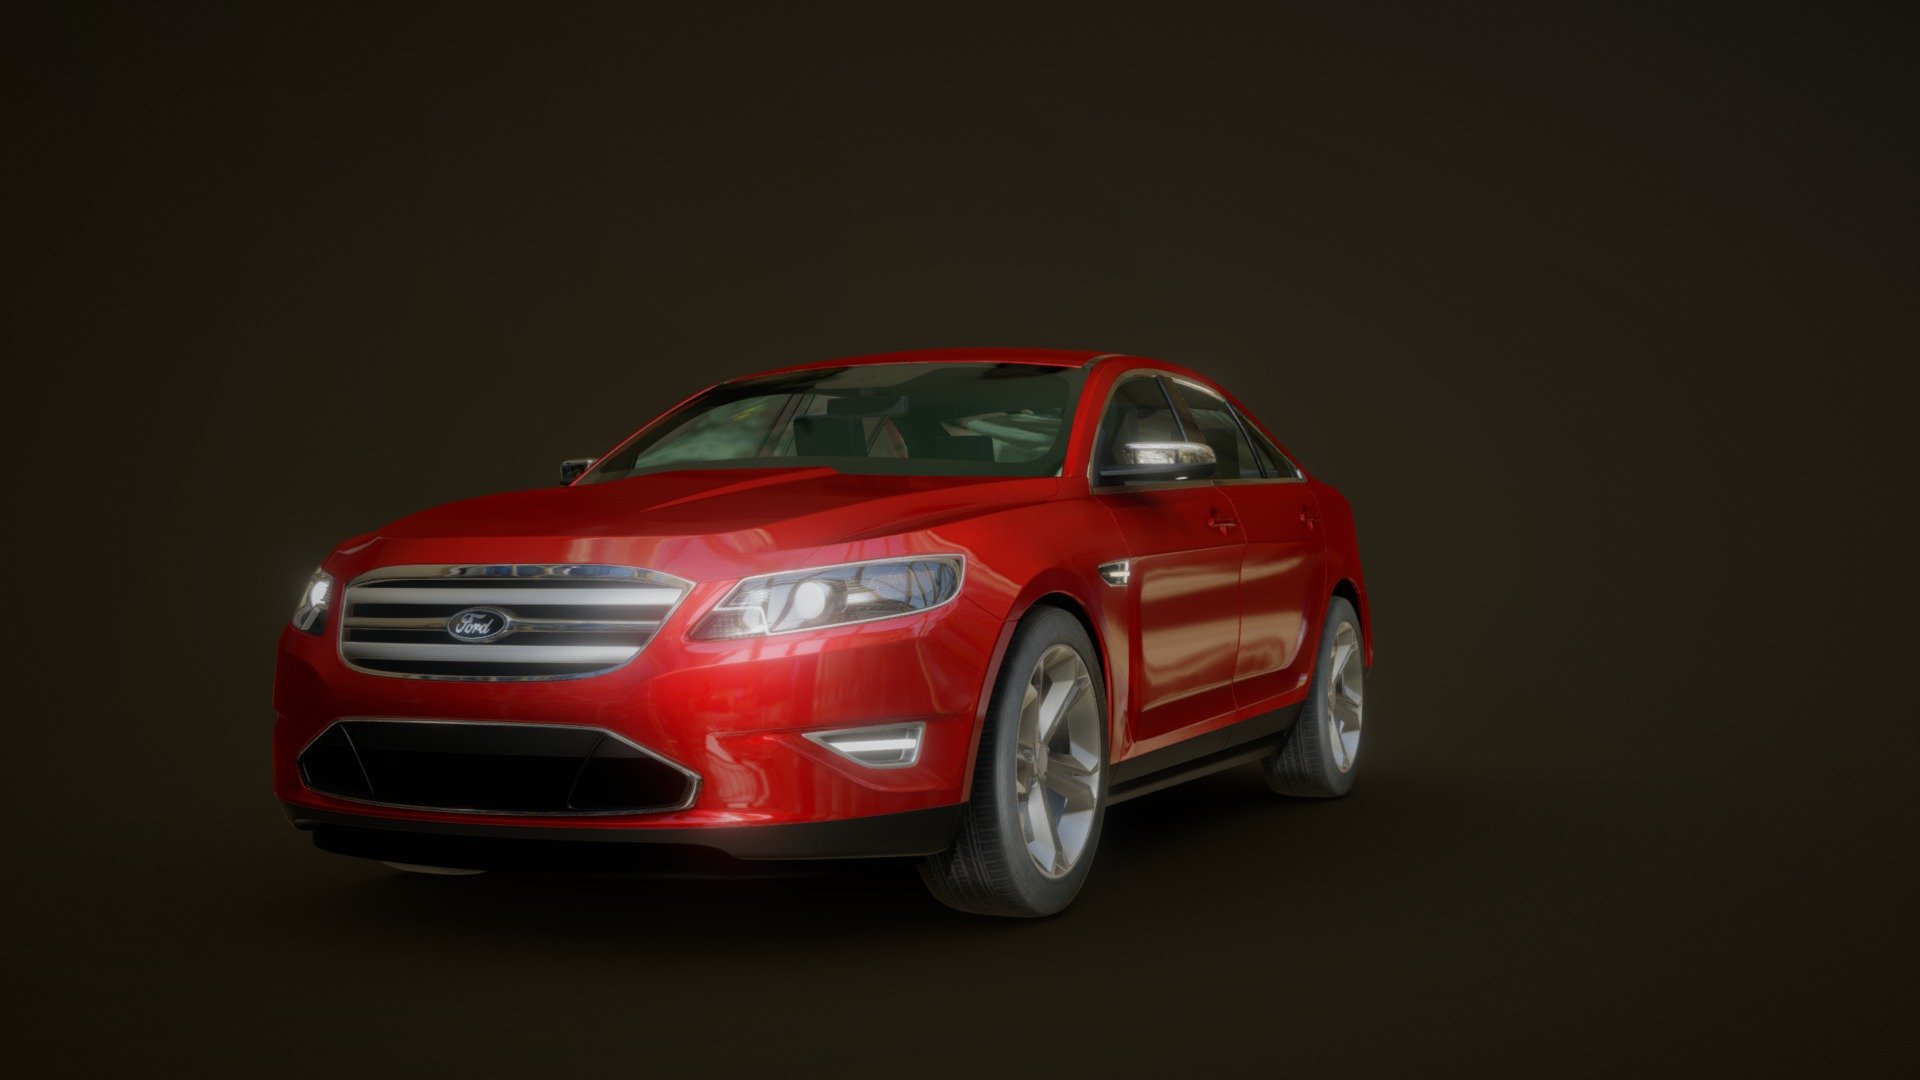 A 3.5L Twin Turbo V6 with its curvy and timeless appearance that was later on used as a police interceptor.

It's part of the Ford Taurus 2010 collection on Blendermarket. Check it out 3d model